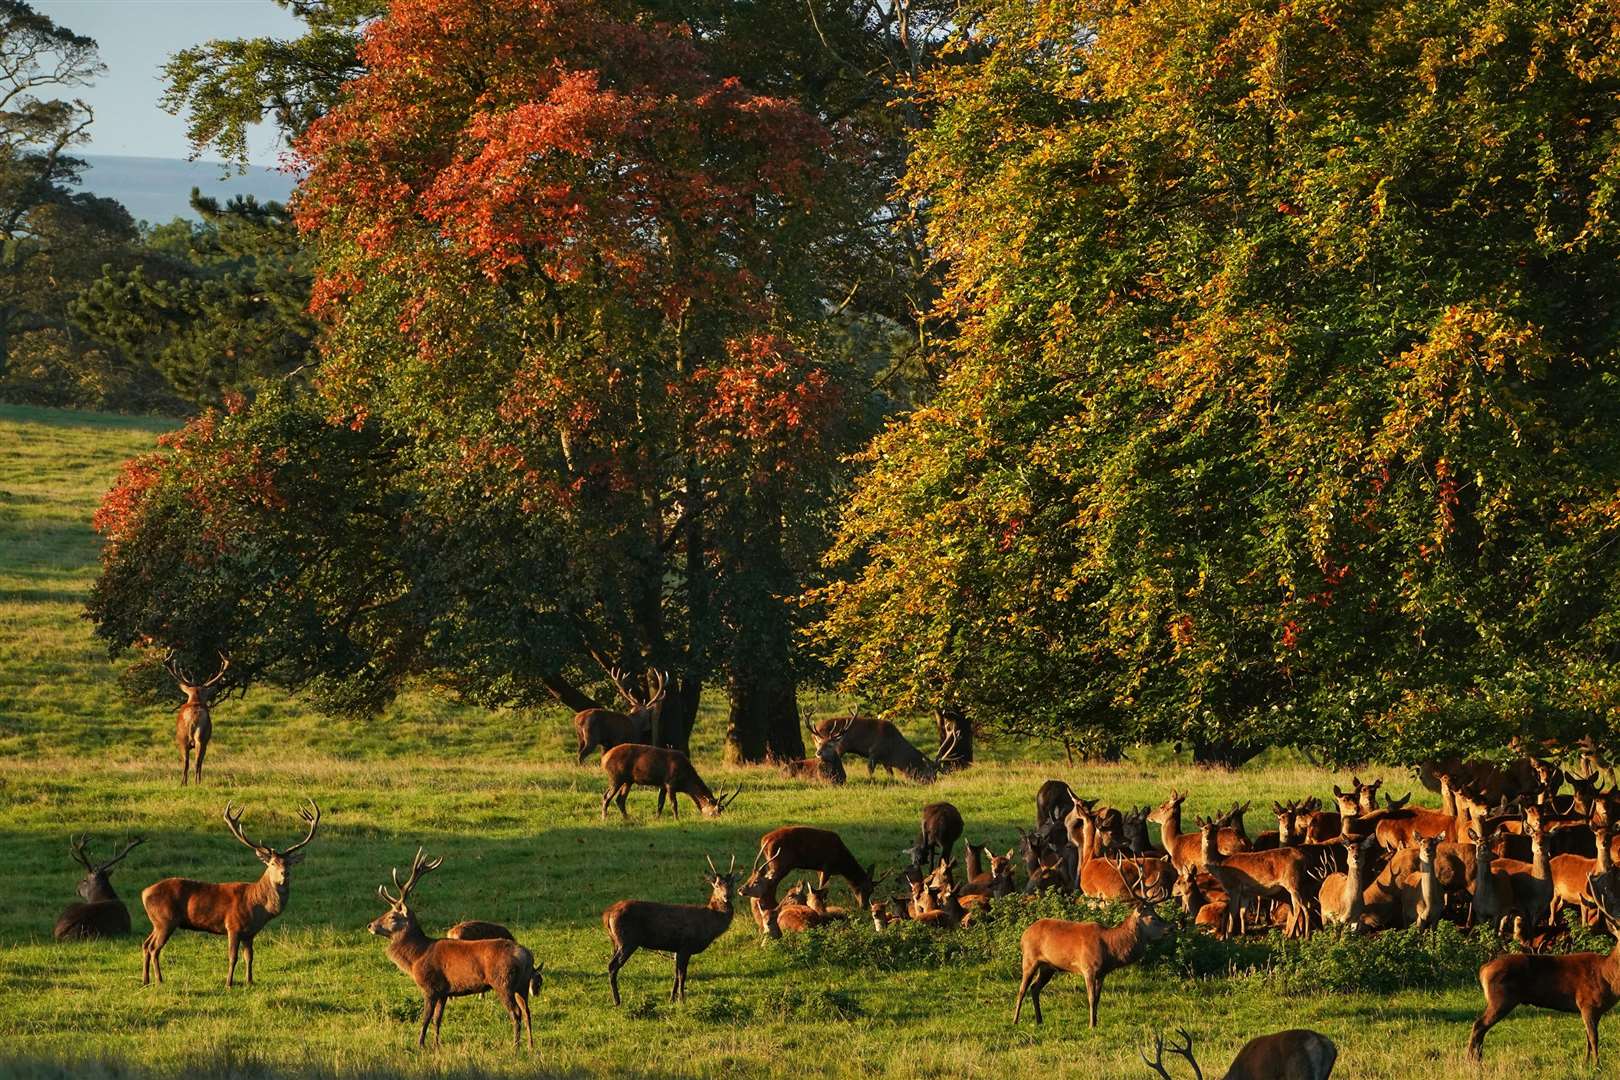 Deer at Raby Castle, a medieval castle near Staindrop in County Durham (Owen Humphreys/PA)